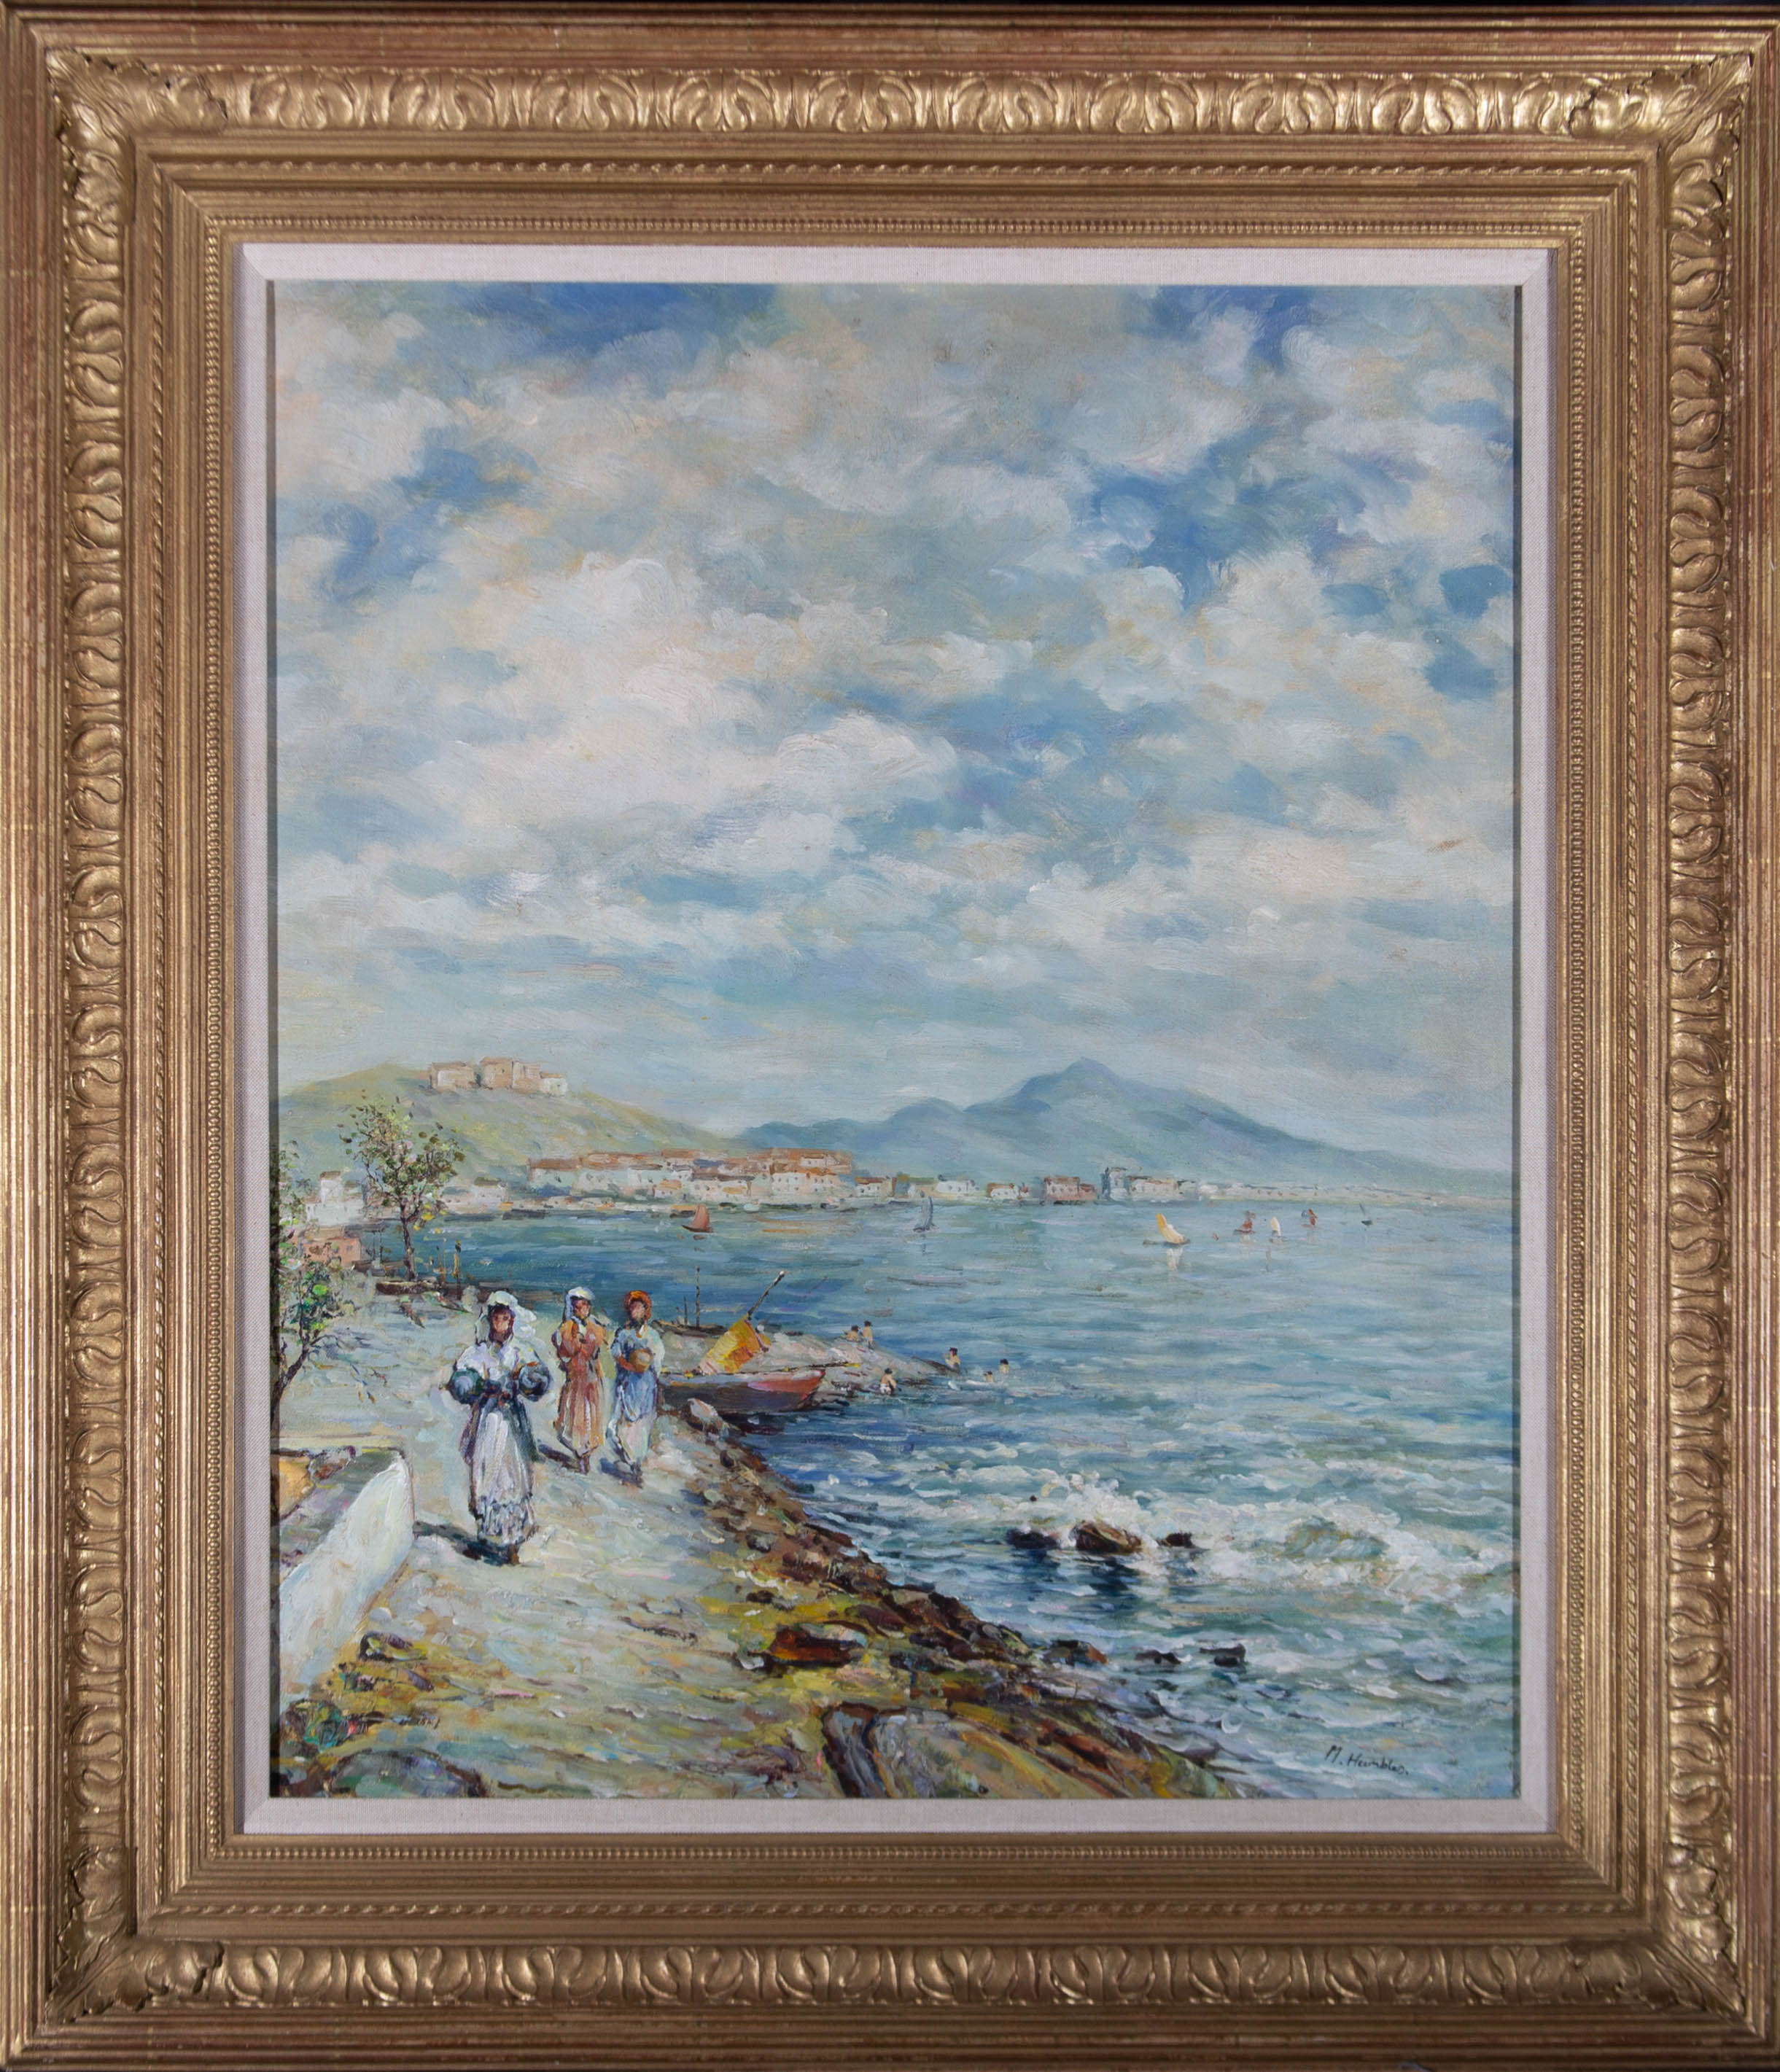 A fine continental coastal scene featuring figures walking along the waterside, sailing boats on the water, and a town and mountain visible on the opposite bank. Very well-presented in an ornate gilt frame with a reeded outer edge and acanthus leaf